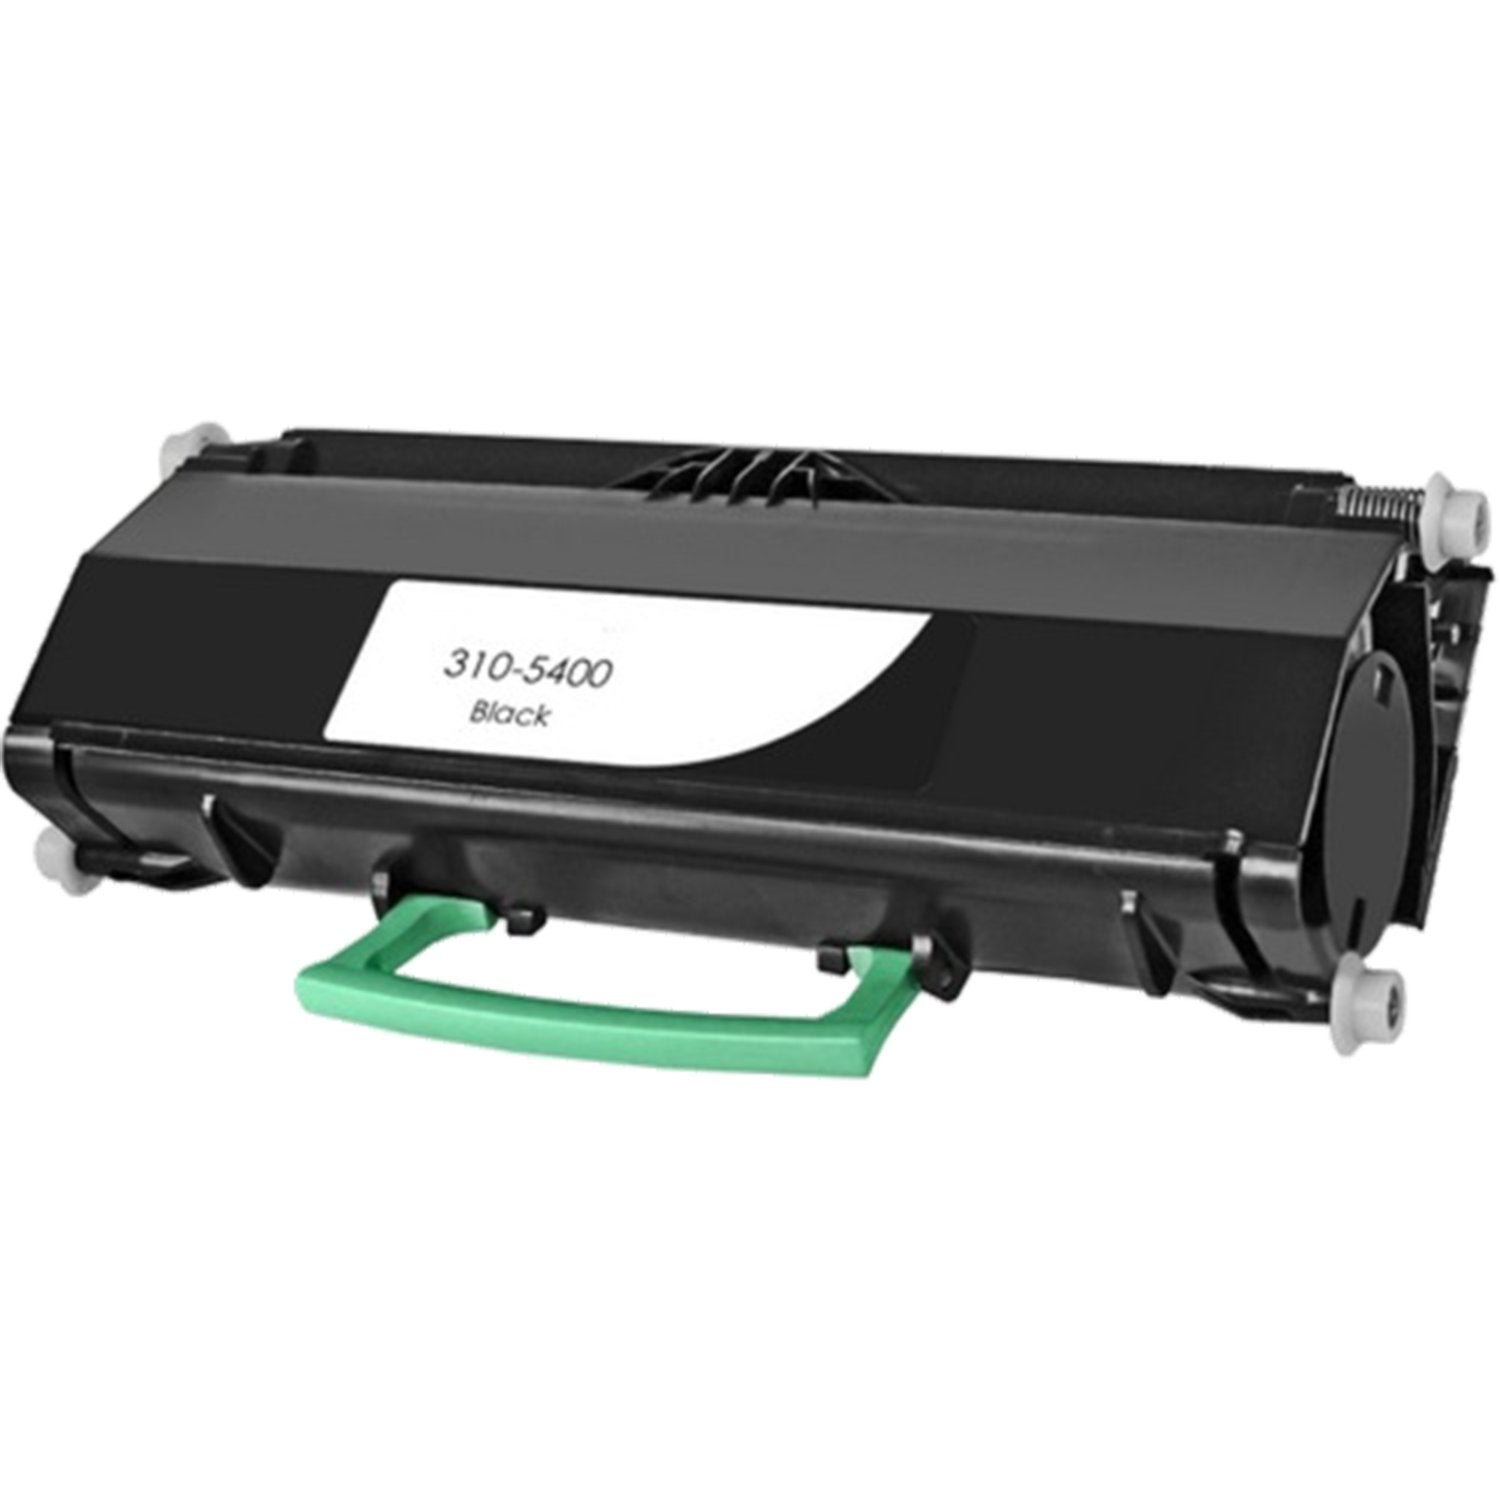 Absolute Toner Compatible Dell 310-5400 High Yield Black Toner Cartridge | Absolute Toner Dell Toner Cartridges